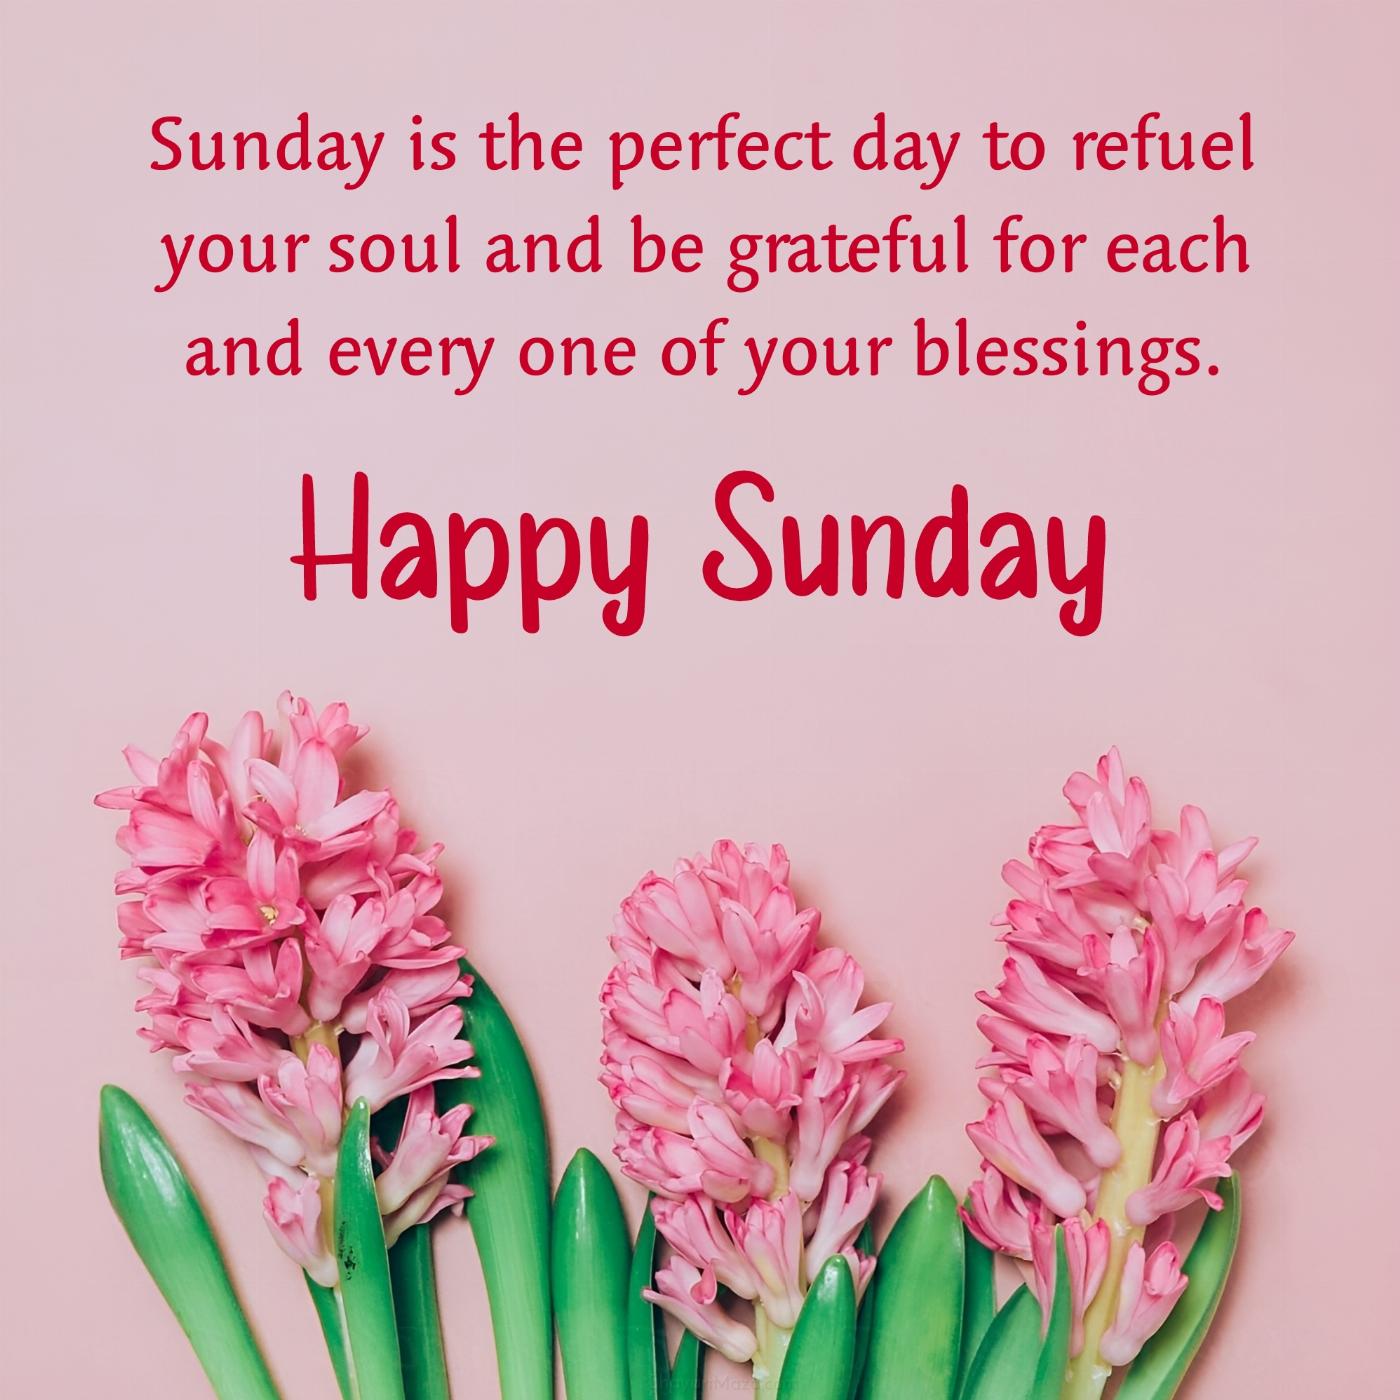 Sunday is the perfect day to refuel your soul and be grateful